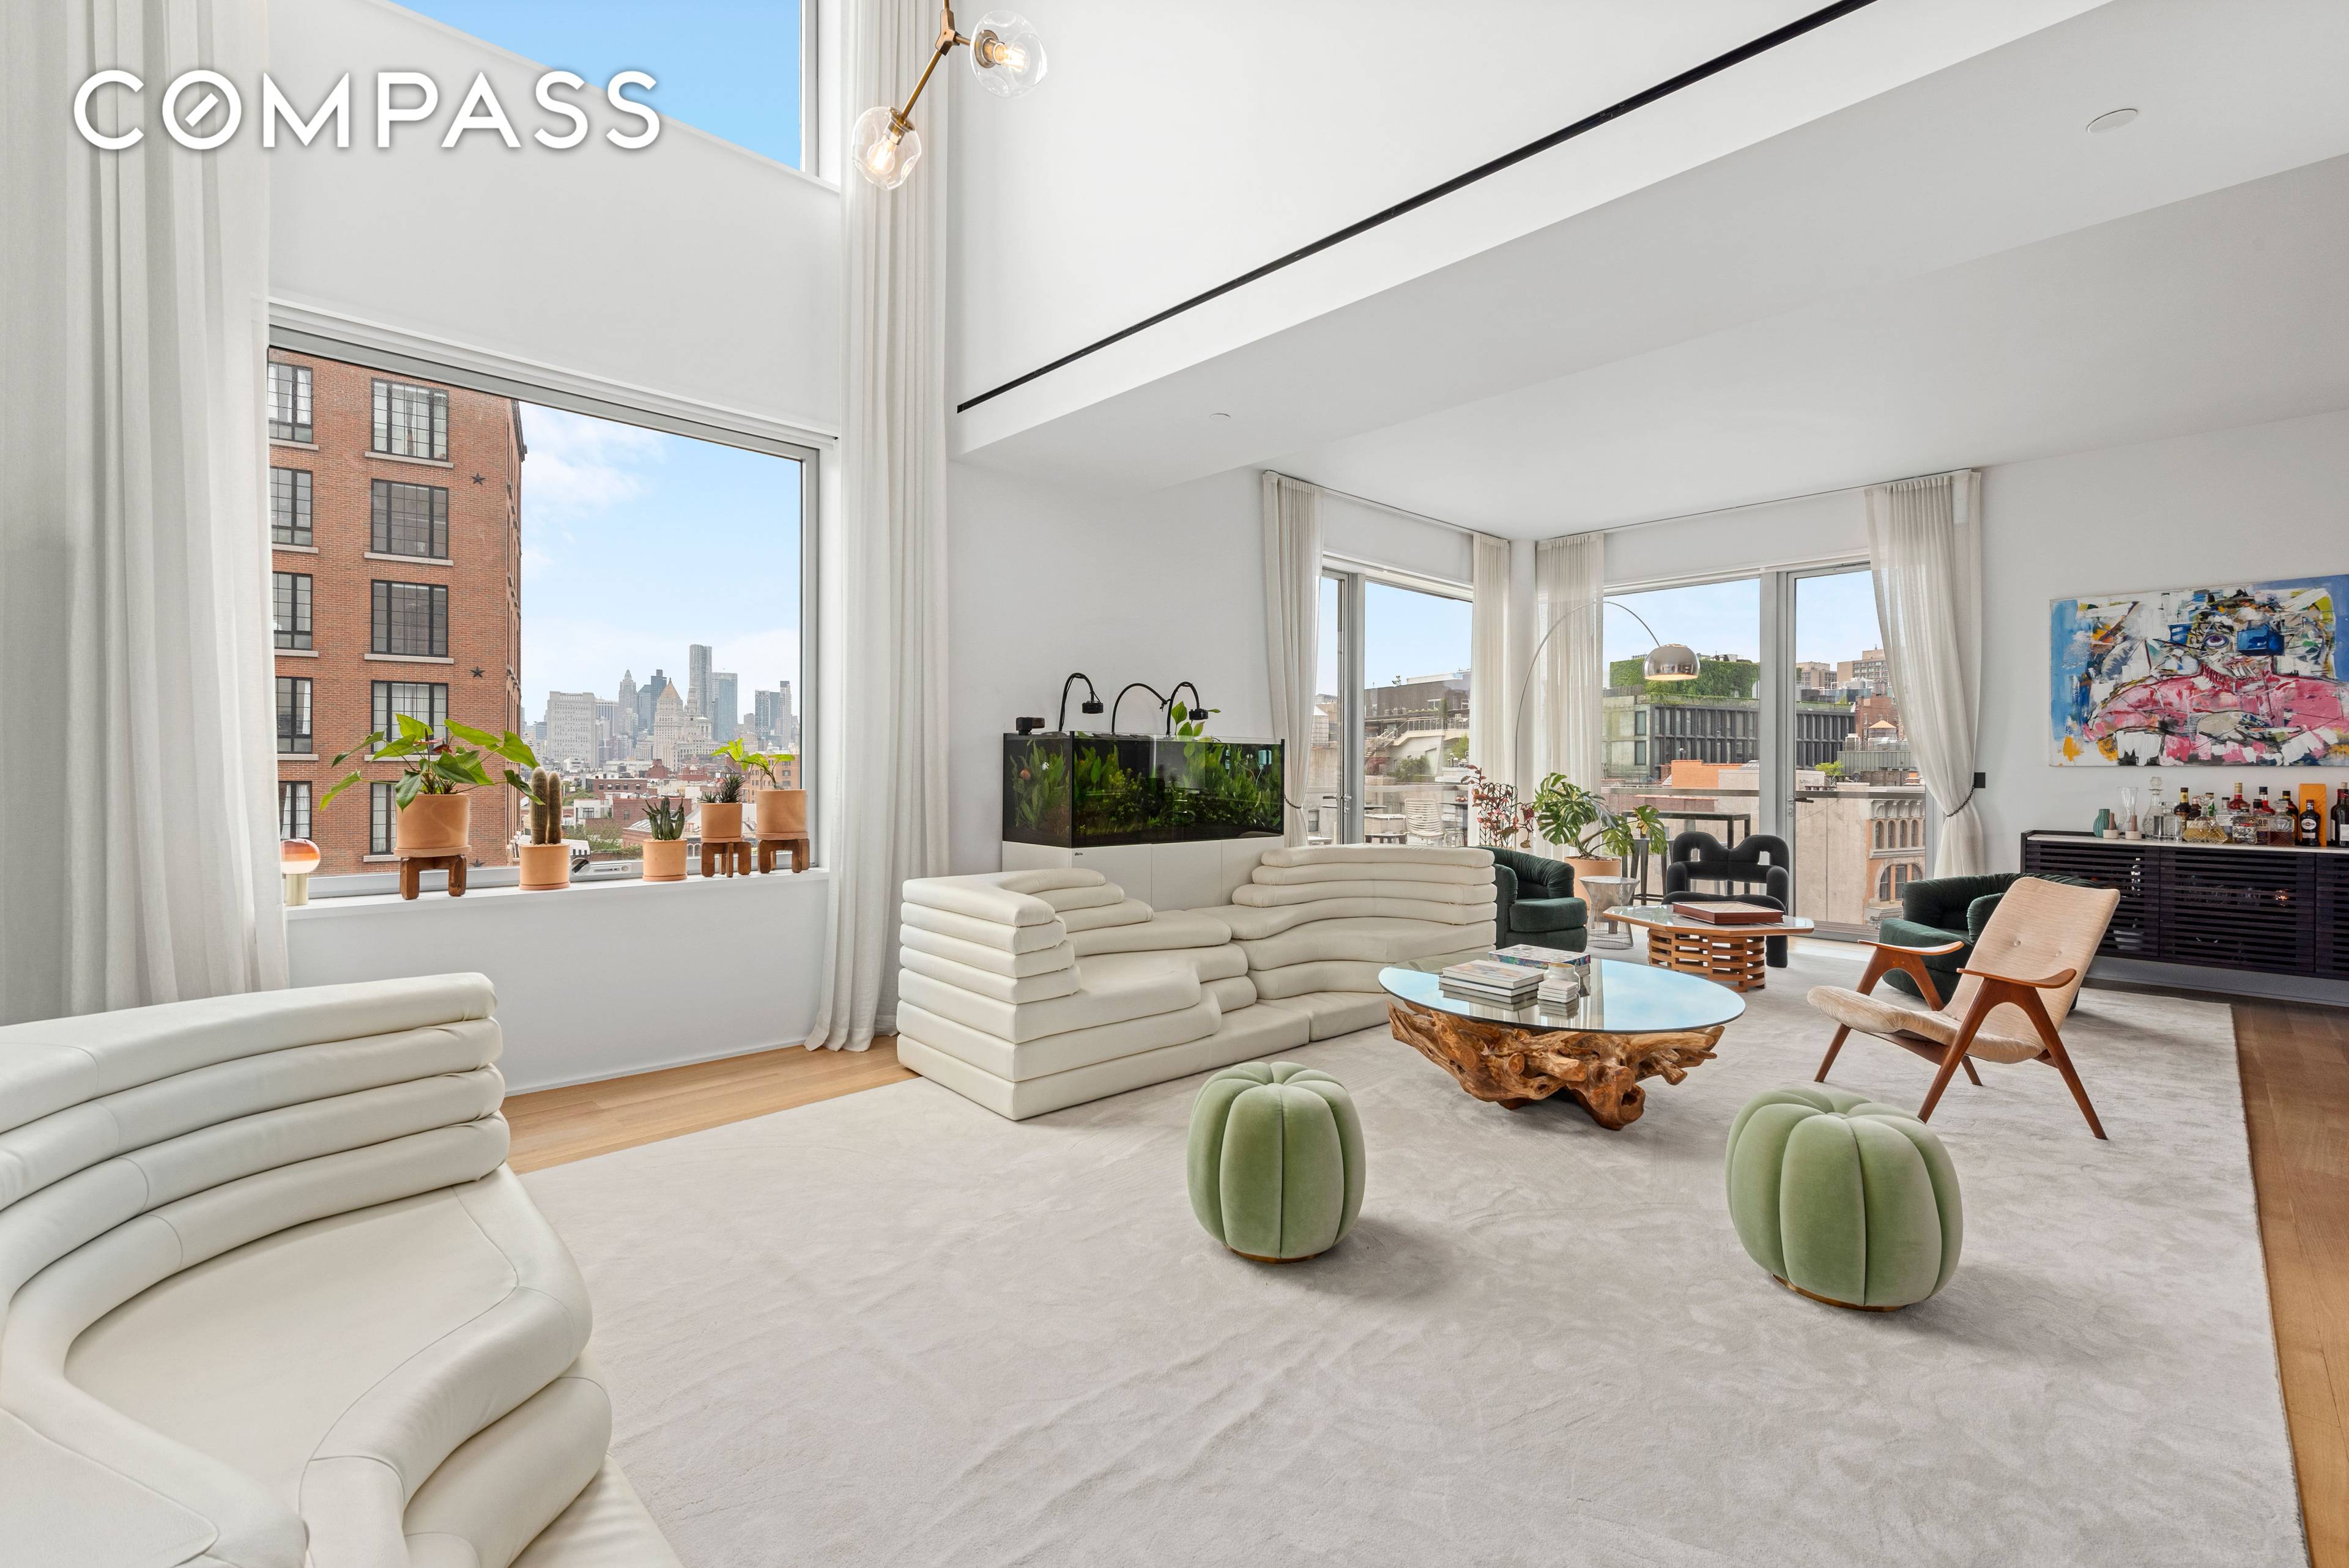 Welcome to this exquisite 2, 891 square foot duplex home in the heart of The Bowery.